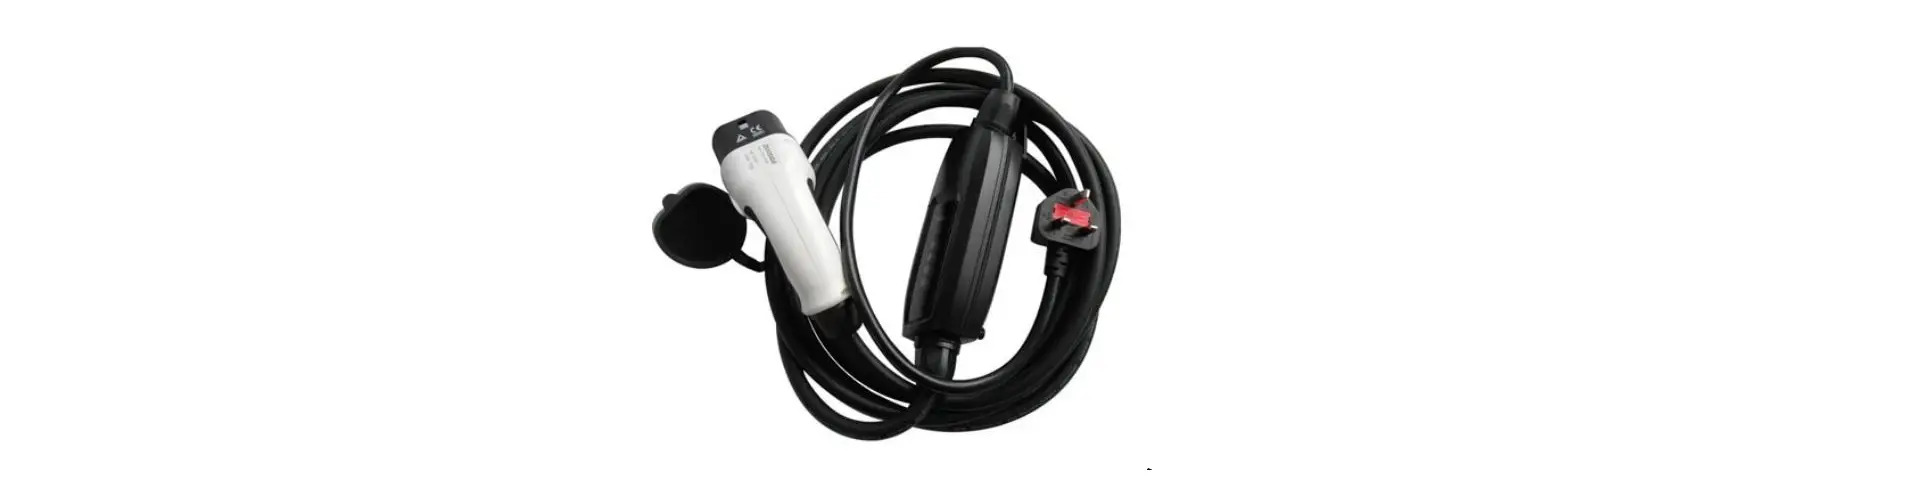 Home EV Charger